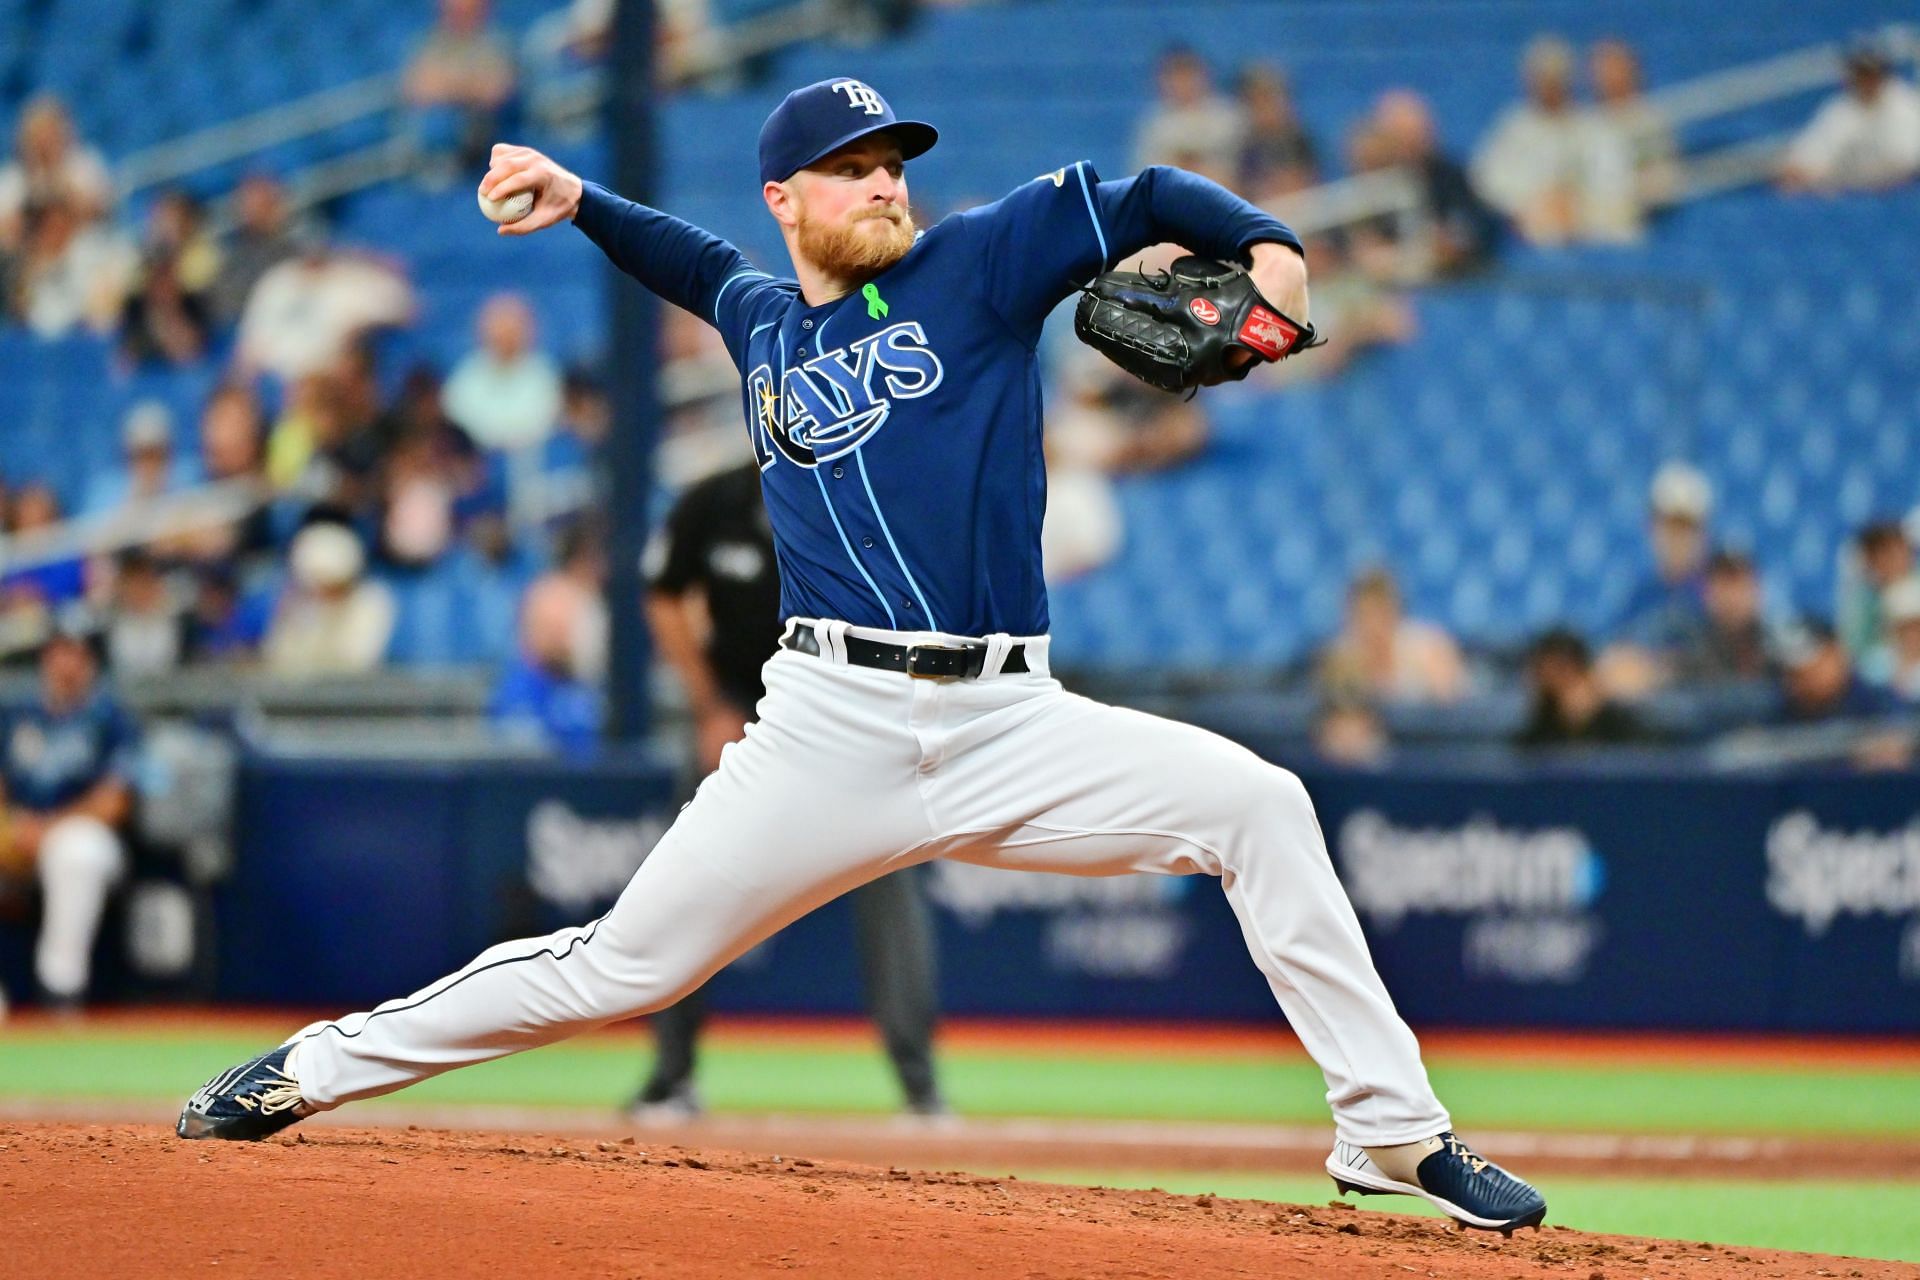 Tampa Bay Rays SP Drew Rasmussen holds a 0.91 WHIP this season.